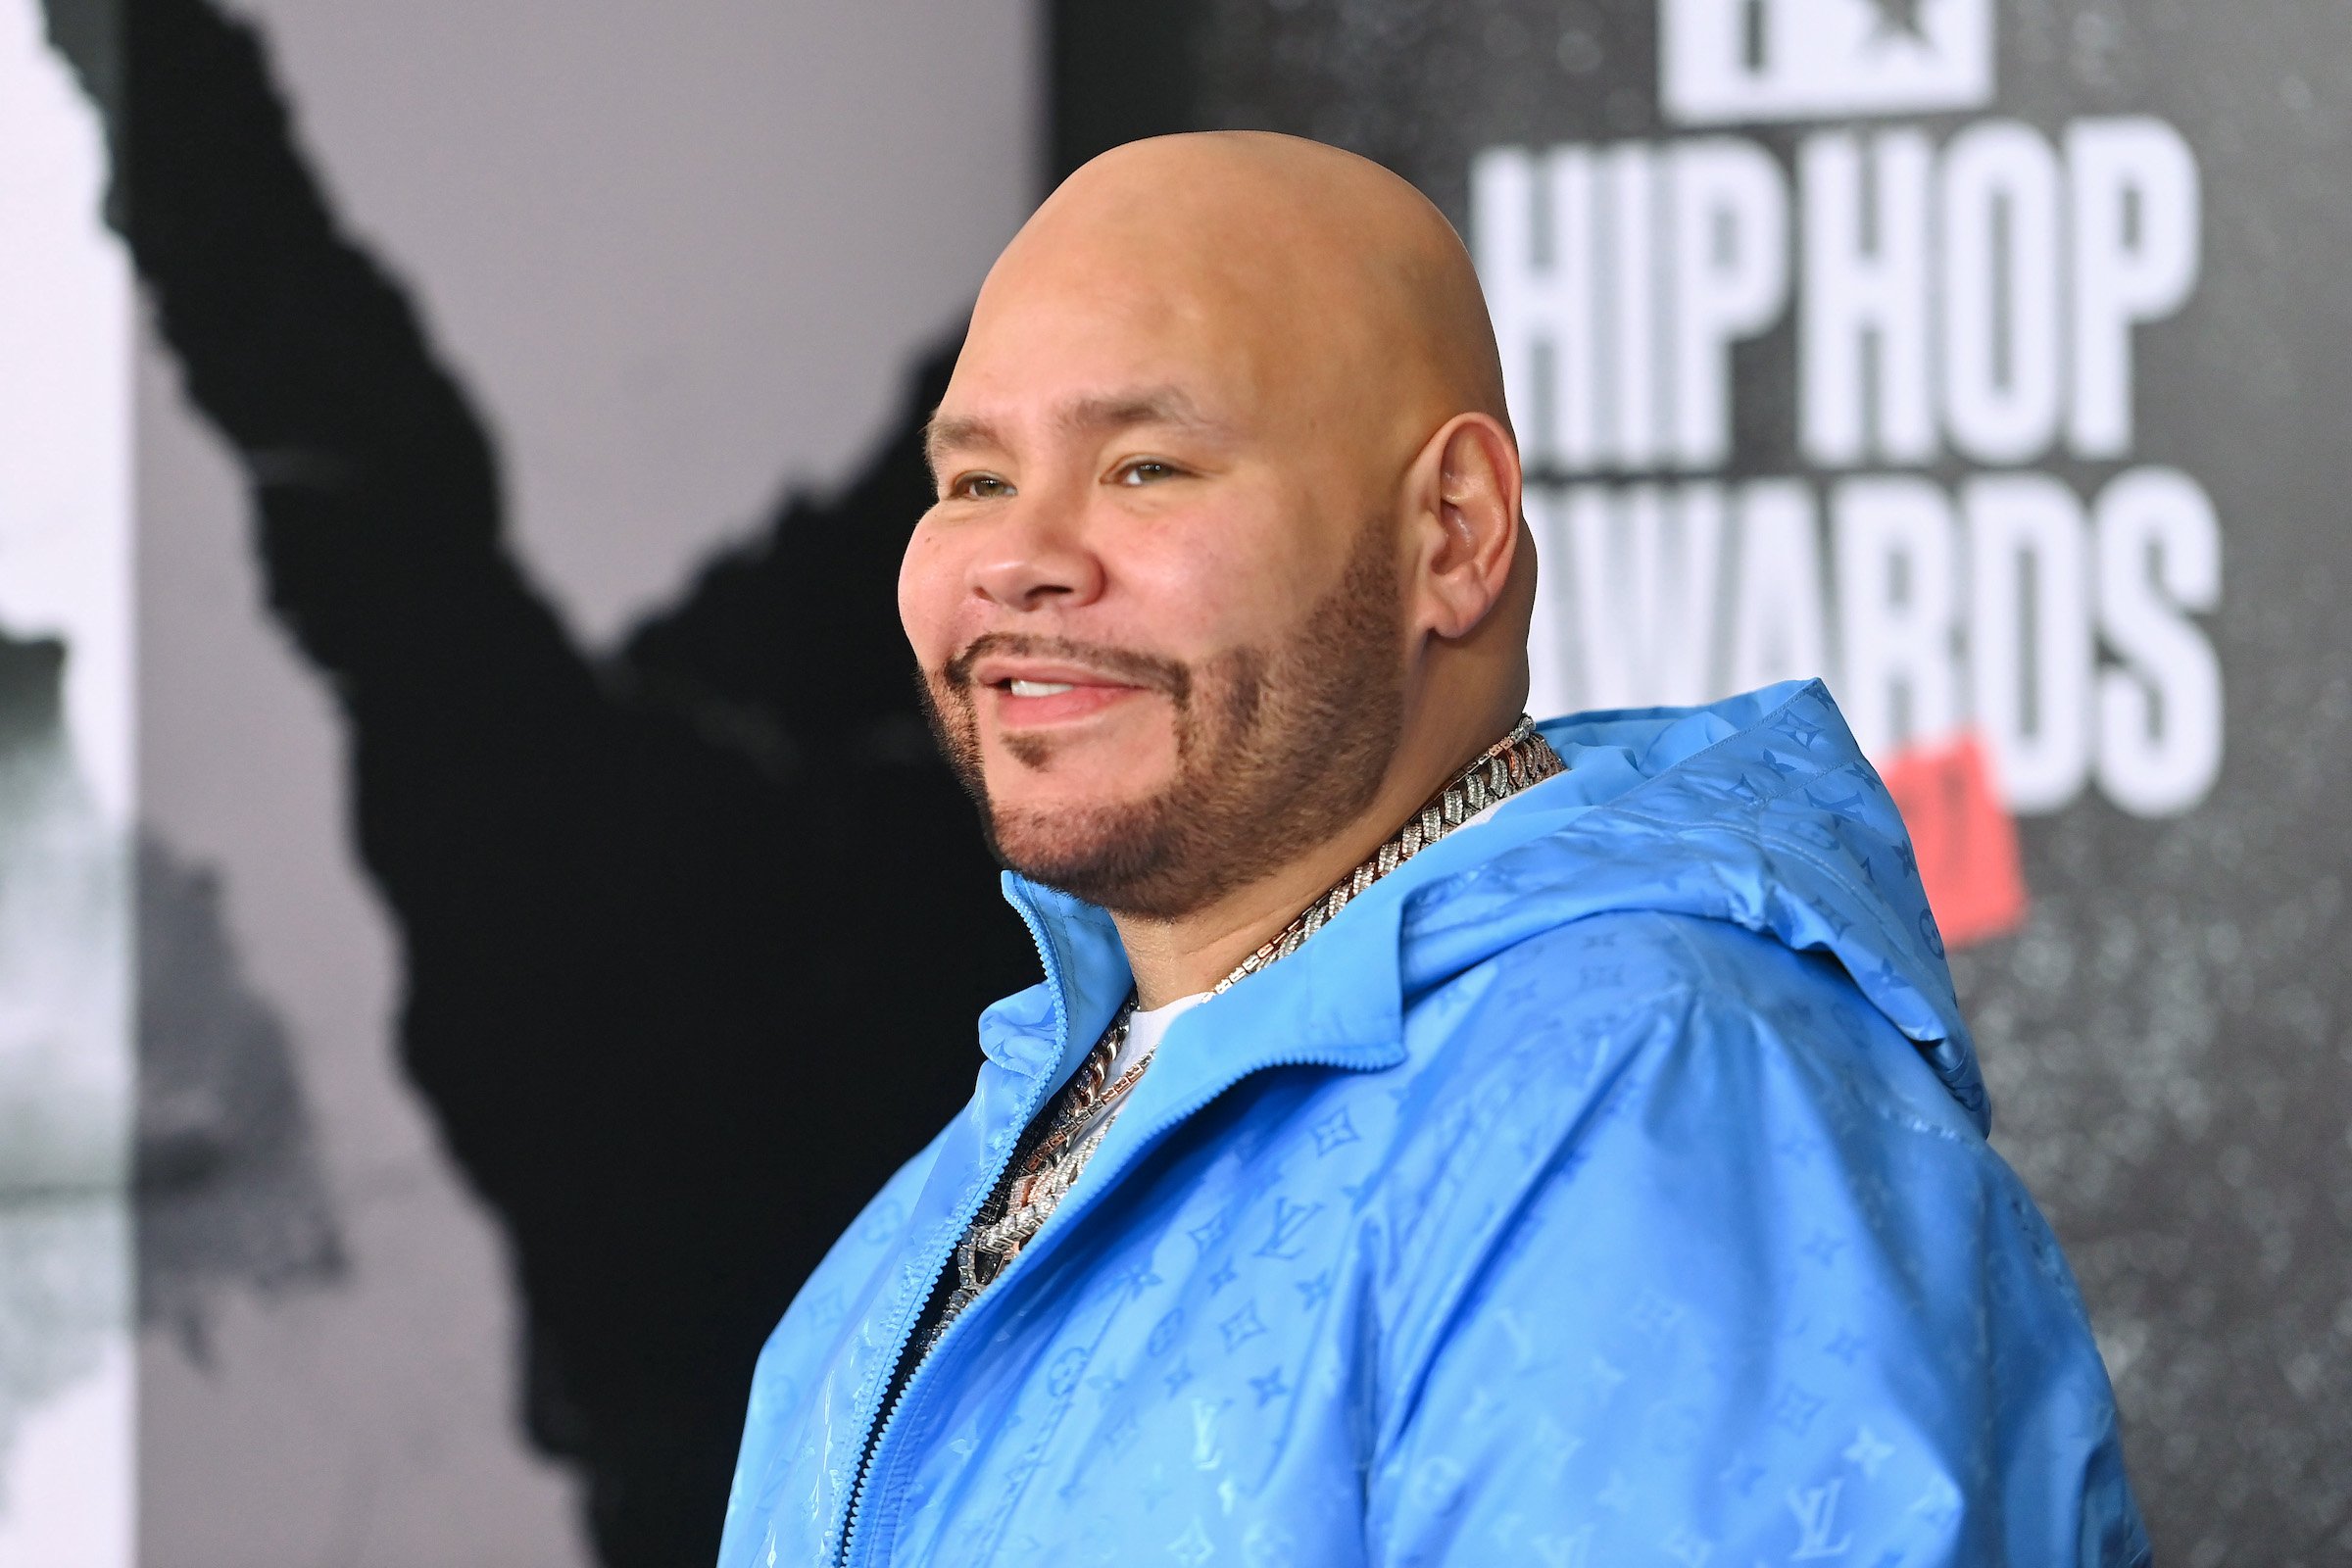 Fat Joe, who has kids of his own